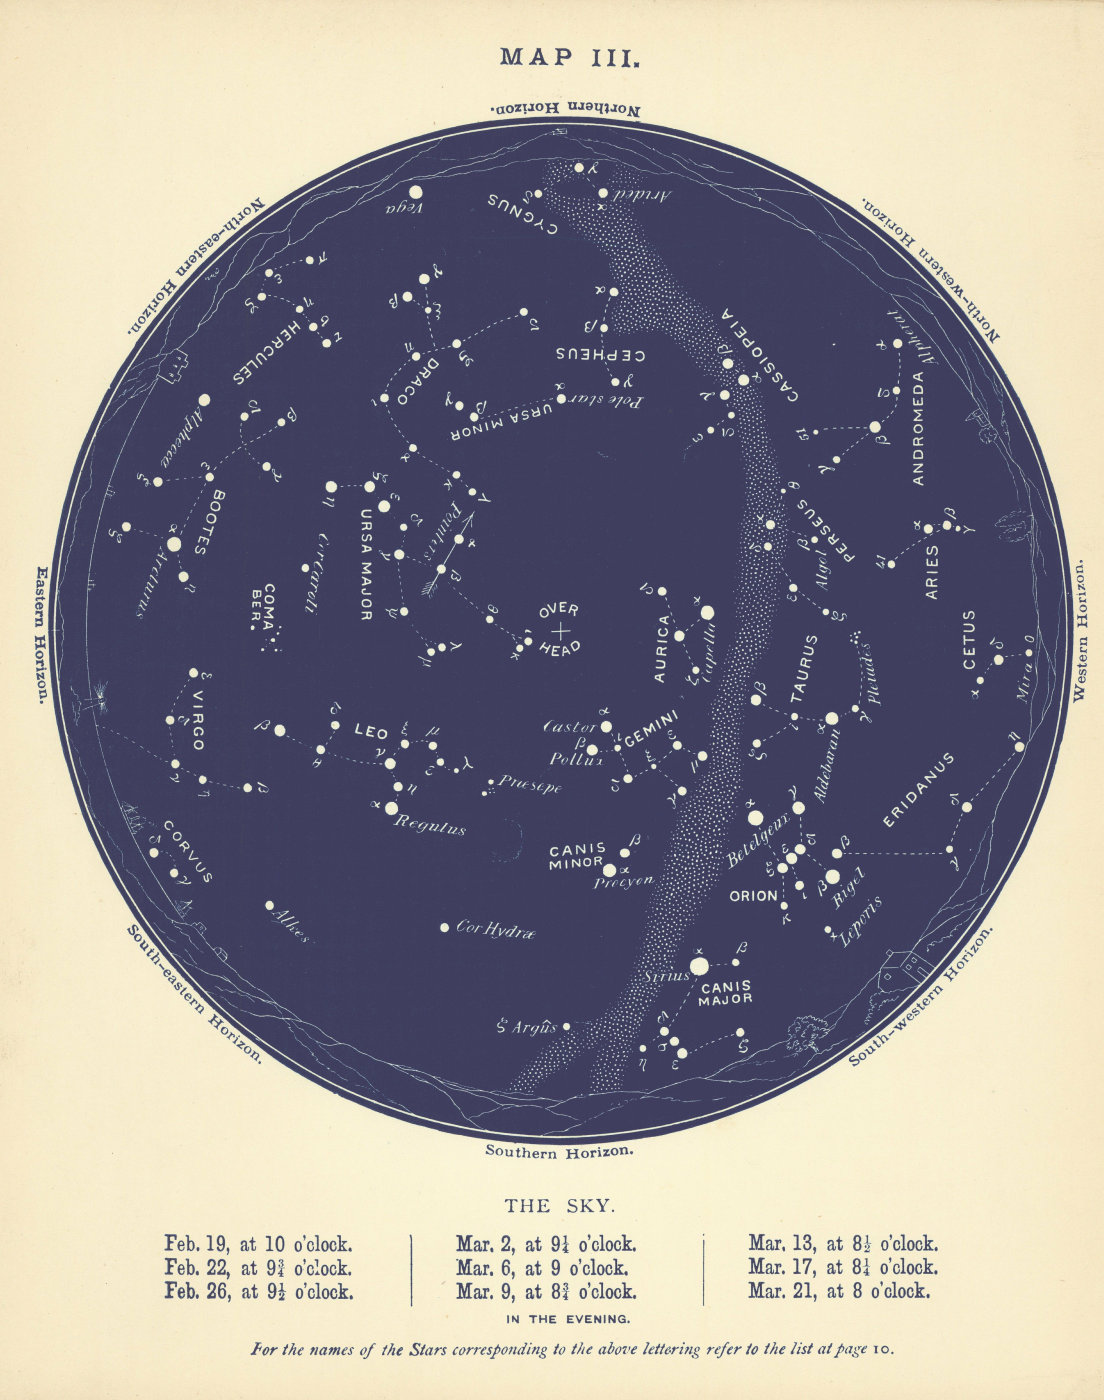 Associate Product STAR MAP III. The Night Sky. February-March. Astronomy. PROCTOR 1896 old